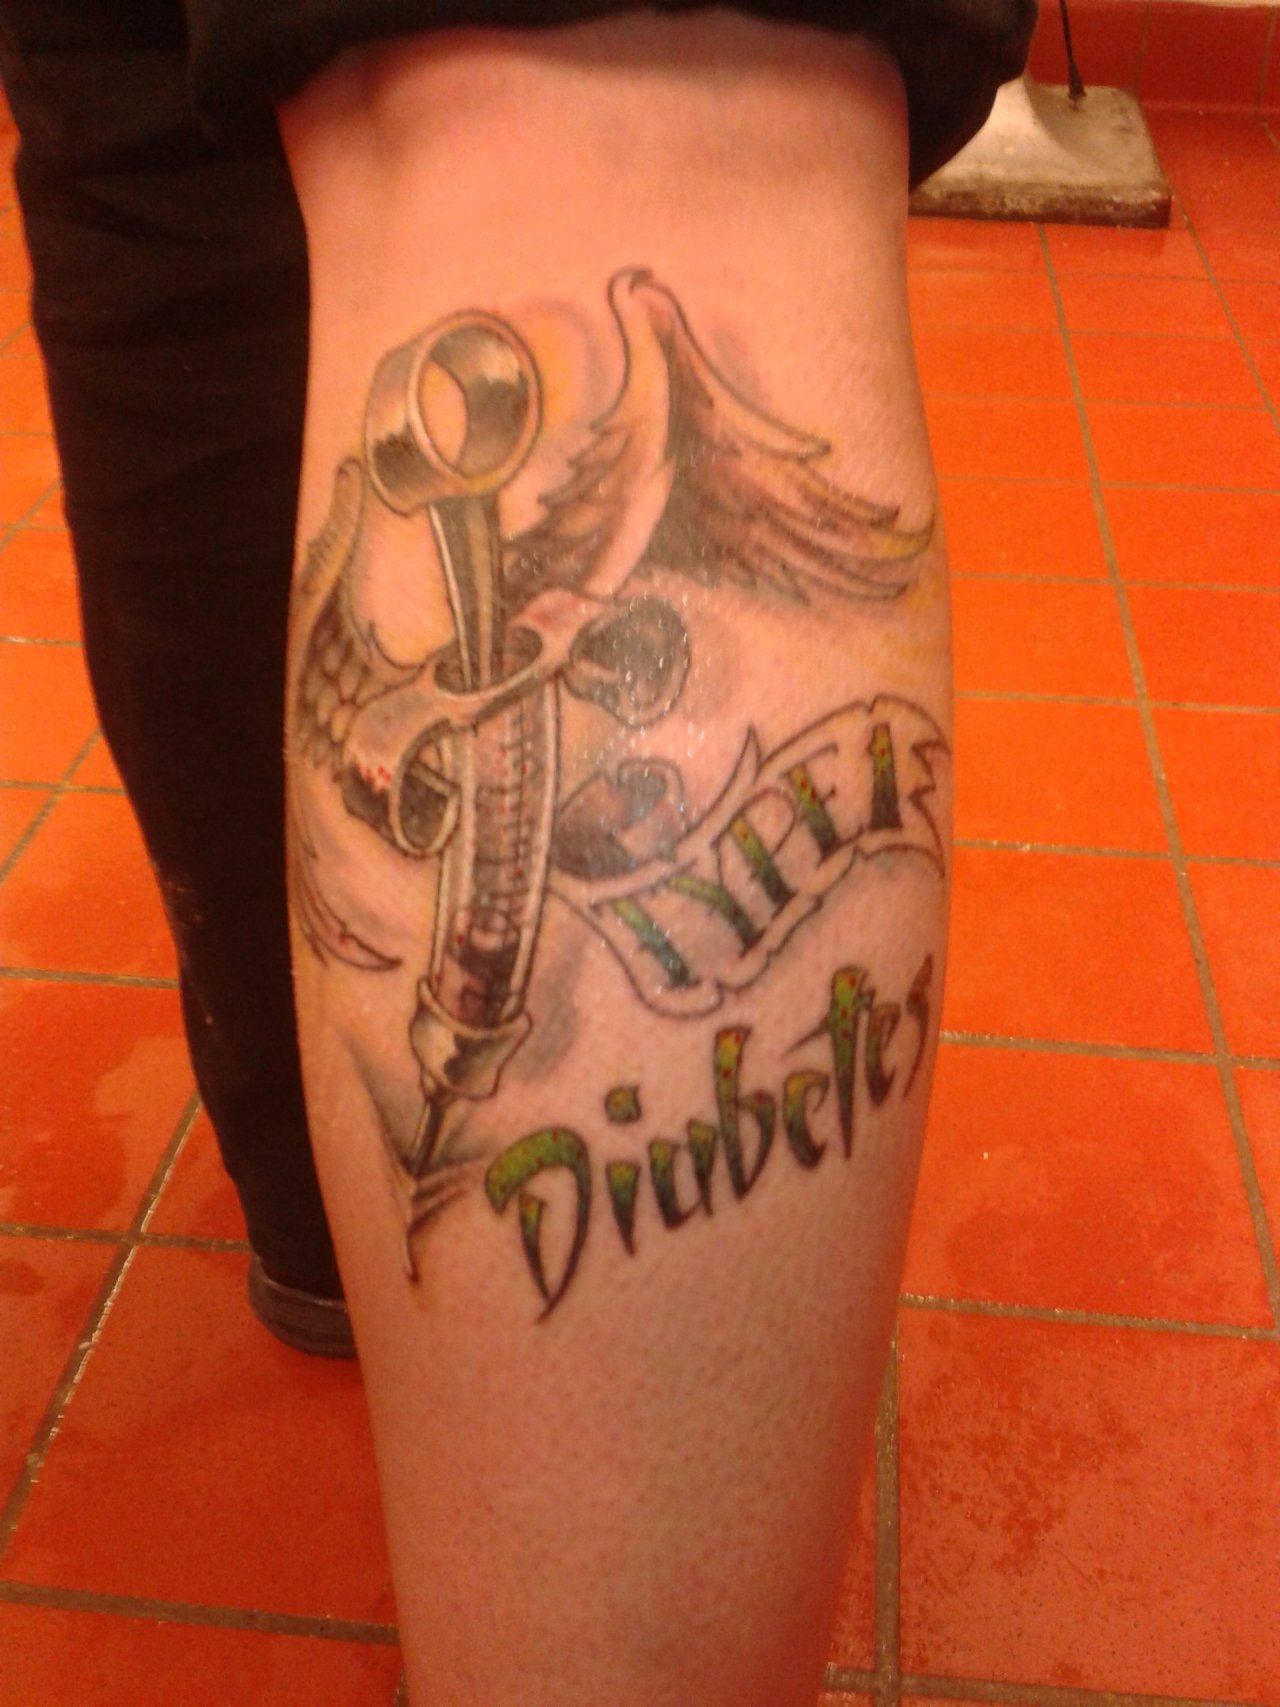 Tonya Carter’s diabetic ink. Tonya was diagnosed 6 years ago in March. She is a pumper and is managing diabetes well. Stay in charge of it, Tonya. I love the concept and design of this tattoo.
Please reblog to spread diabetes awareness.
If you want...